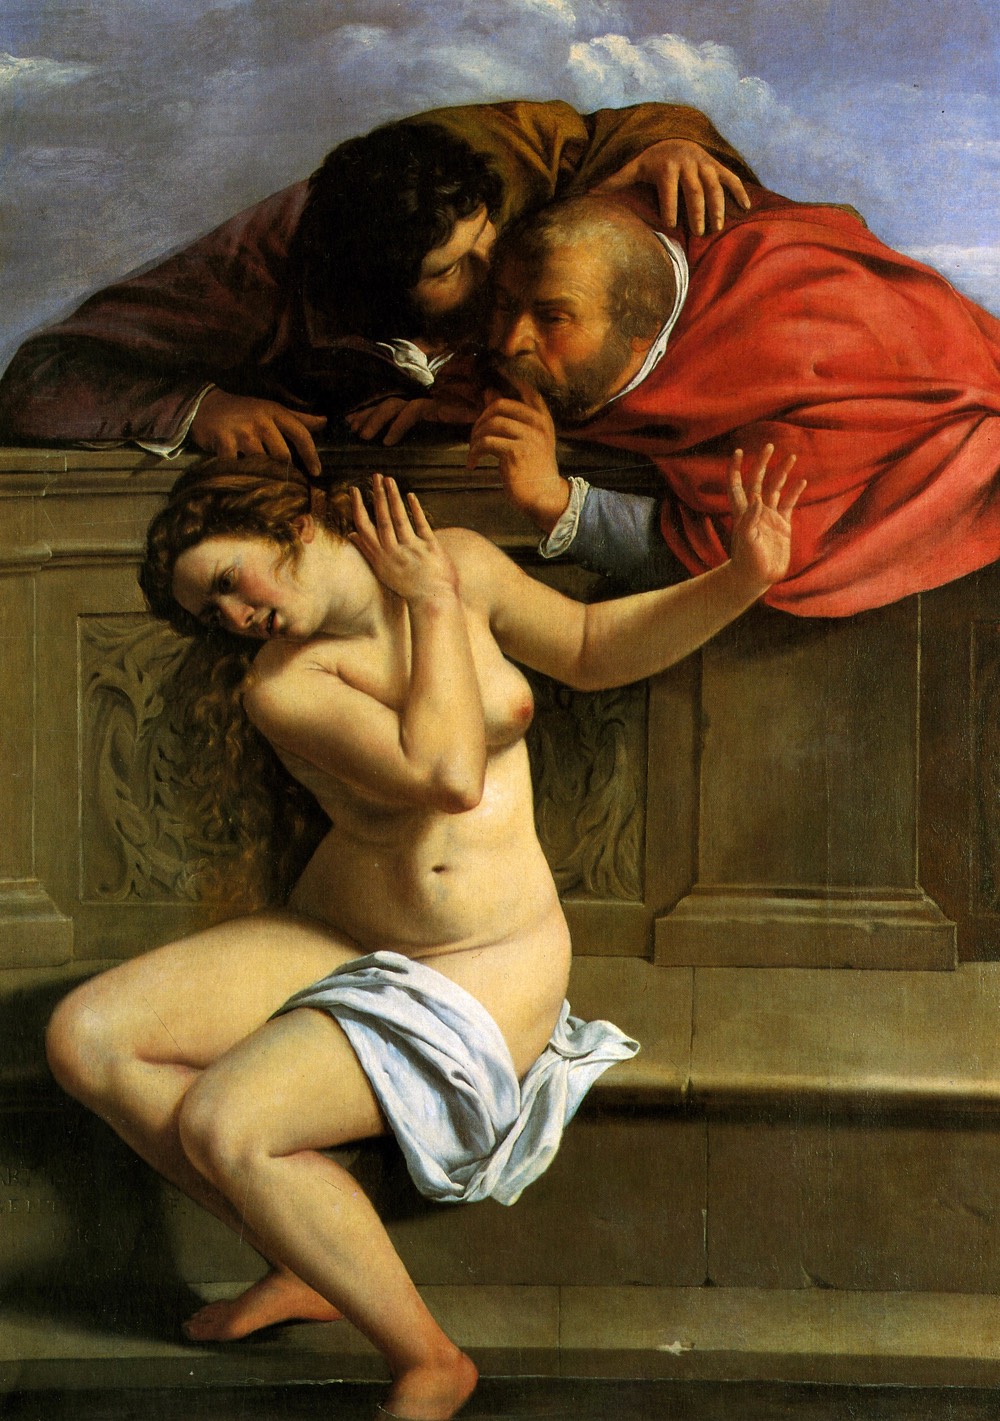 Painting of Susanna and the Elders (1610) by Artemisia Gentileschi